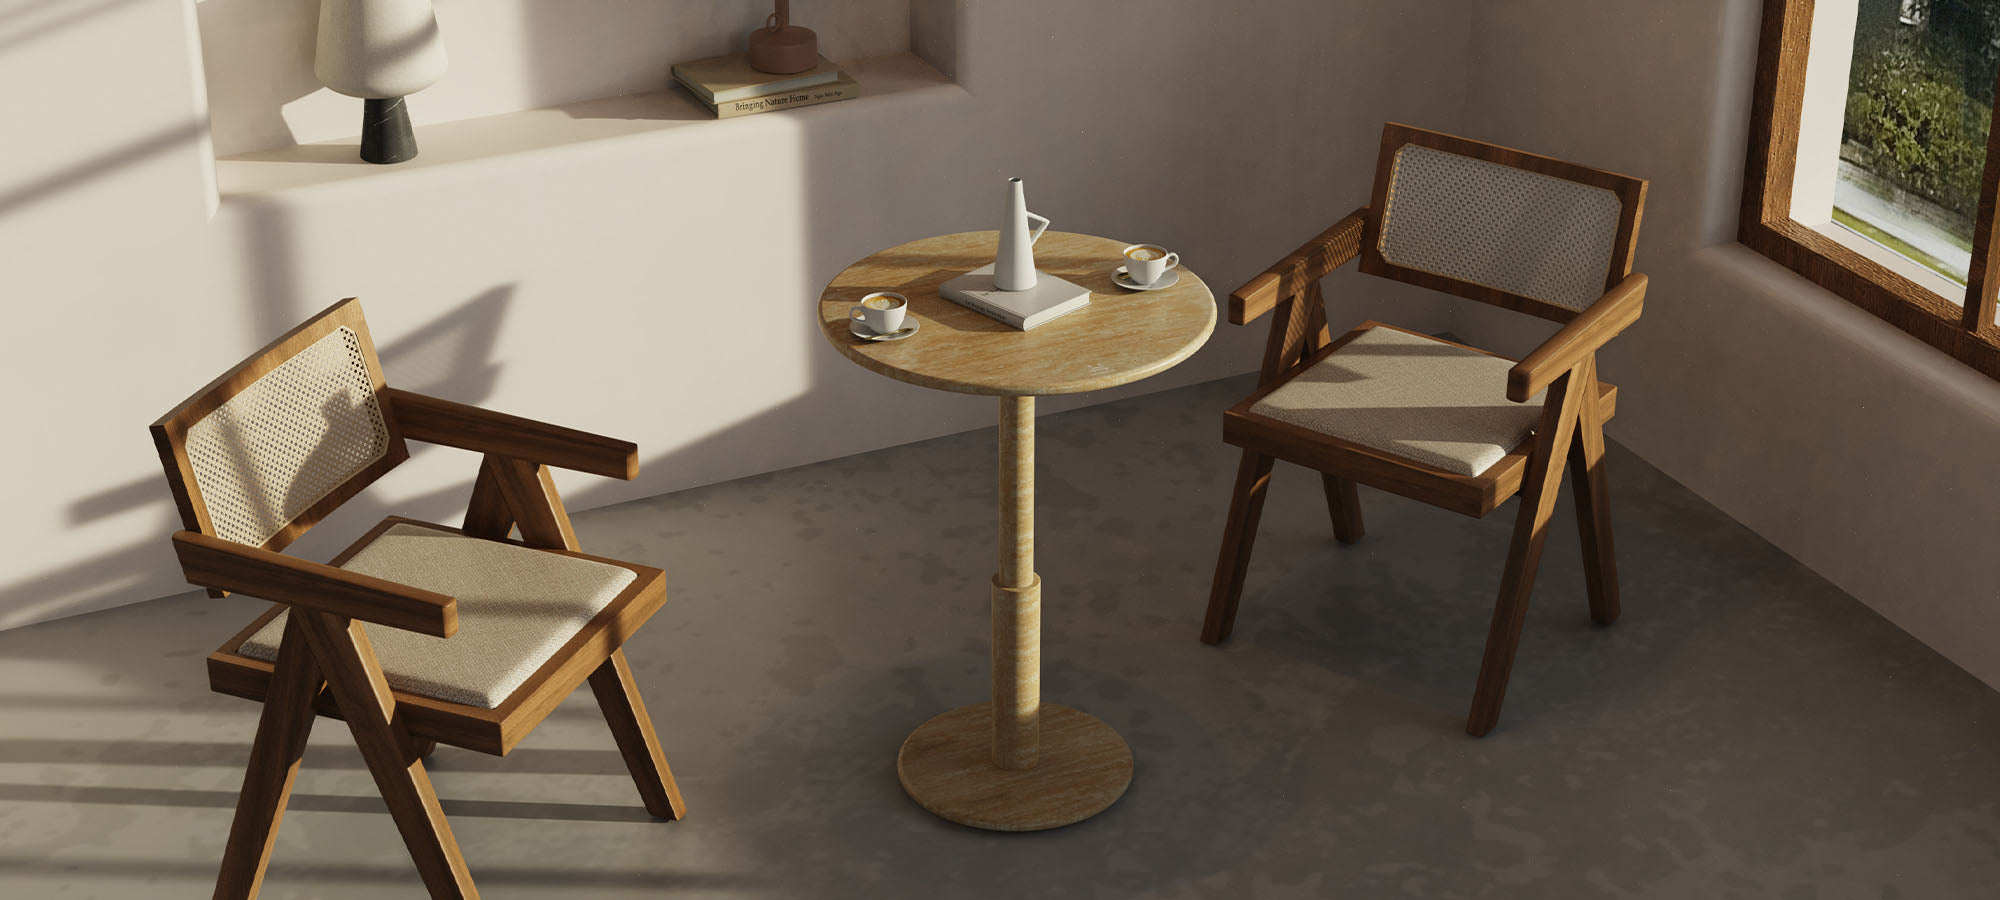 OIXDESIGN Dining Table Collection, RoundHaven Dining Table, Italian Classico Travertine, Macro Scene Graph, Front View